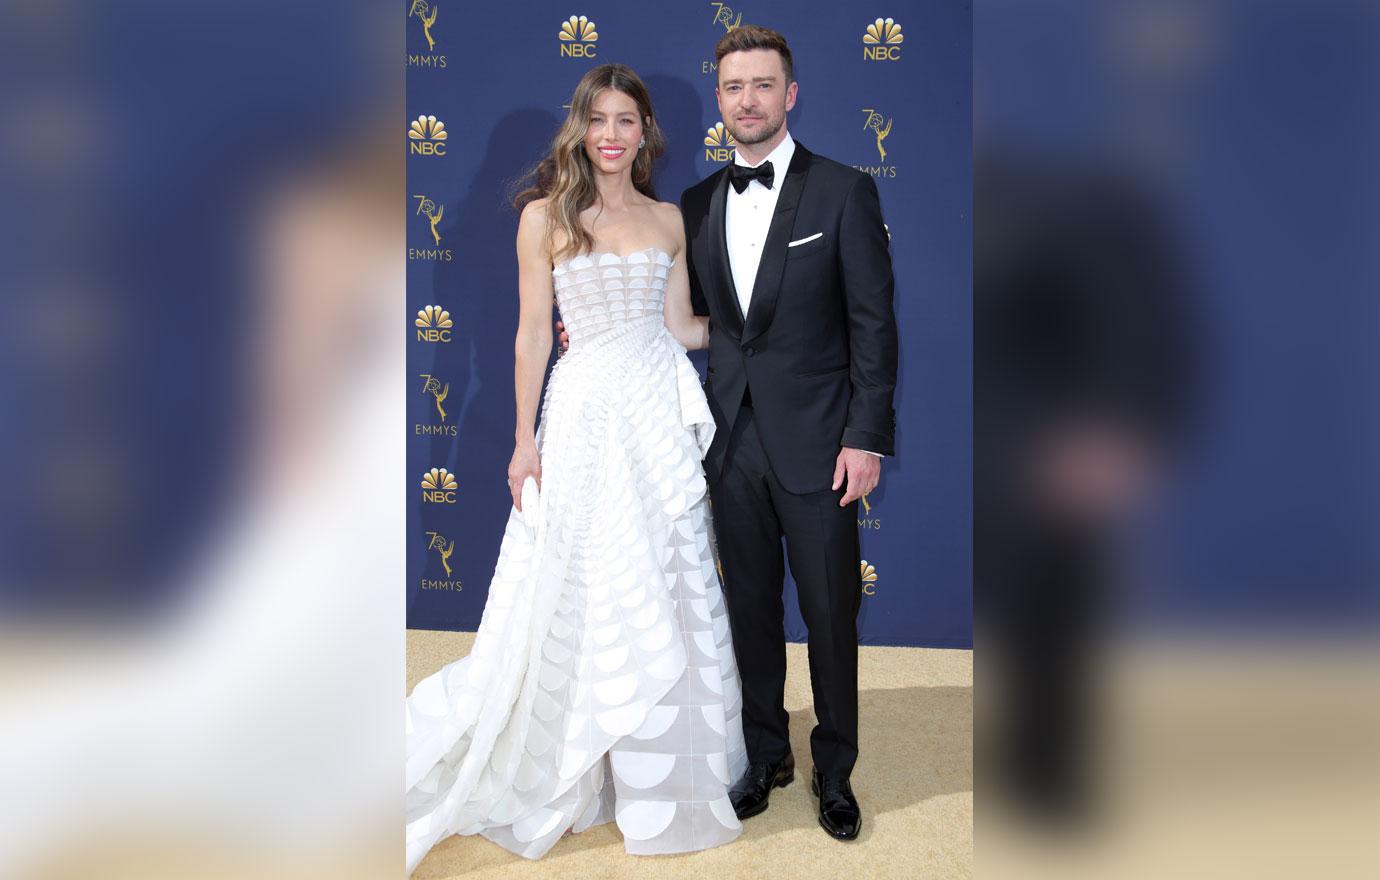 Jessica Biel Lays Down Strict Rules For Justin Timberlake After Scandal